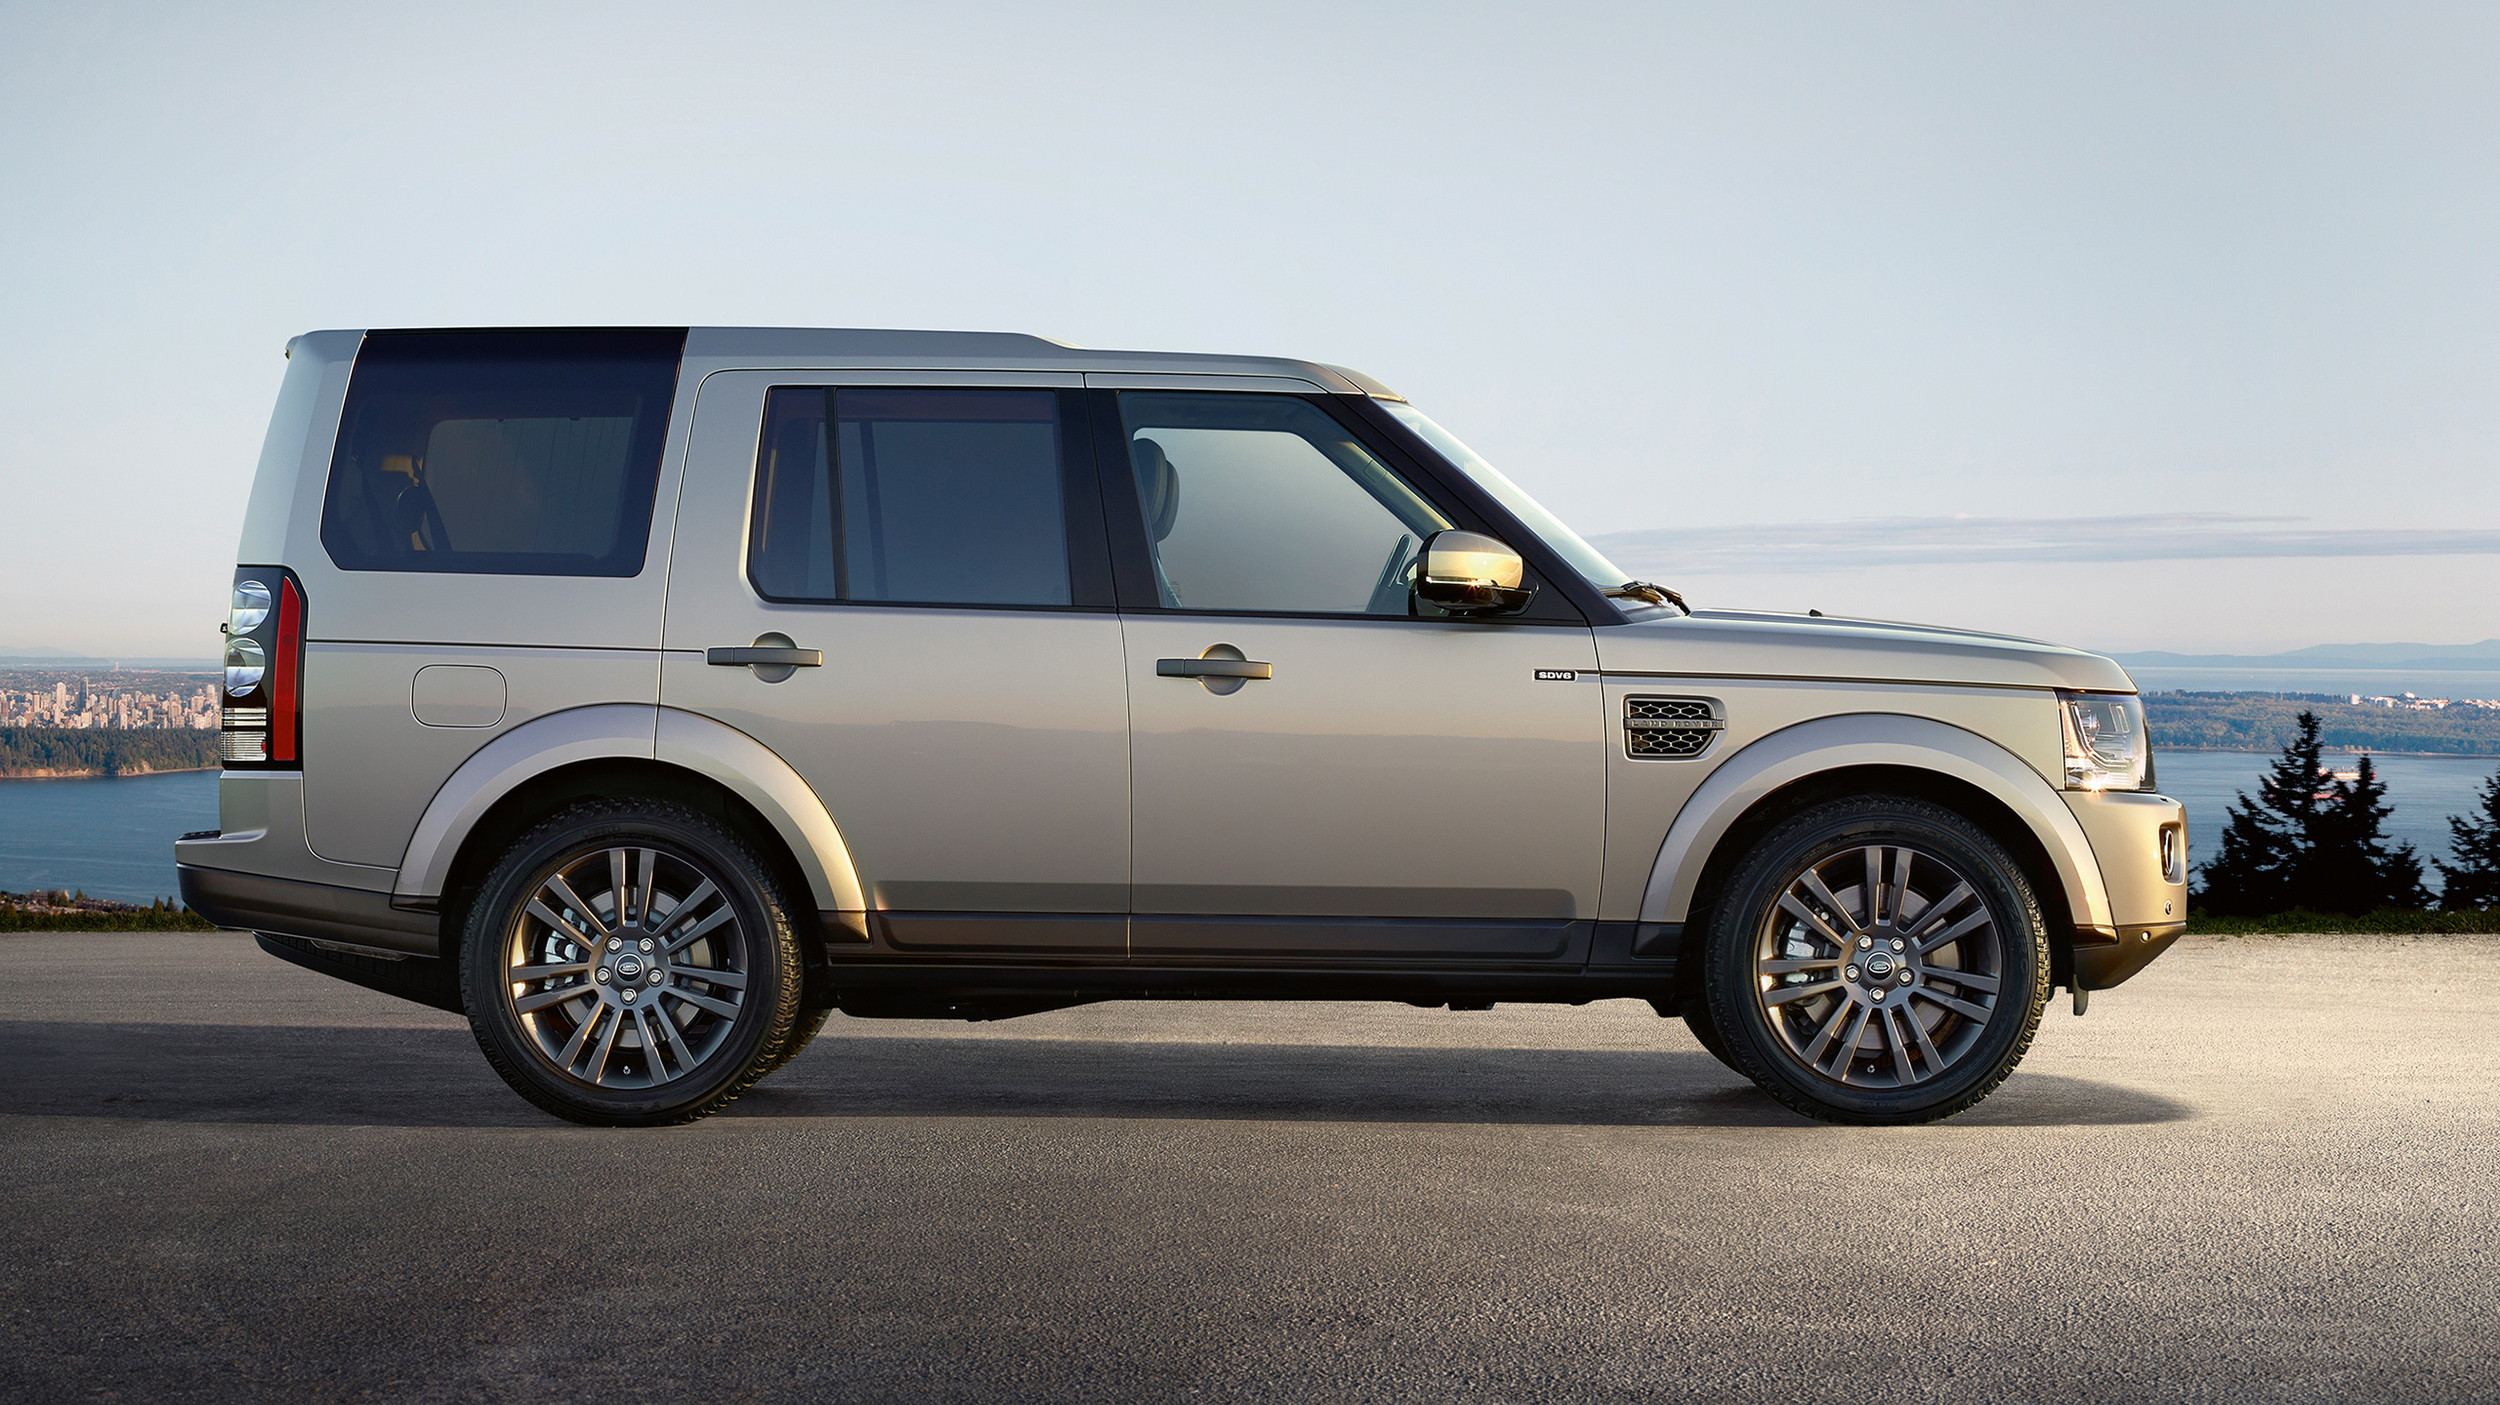 New Land Rover Discovery models revealed